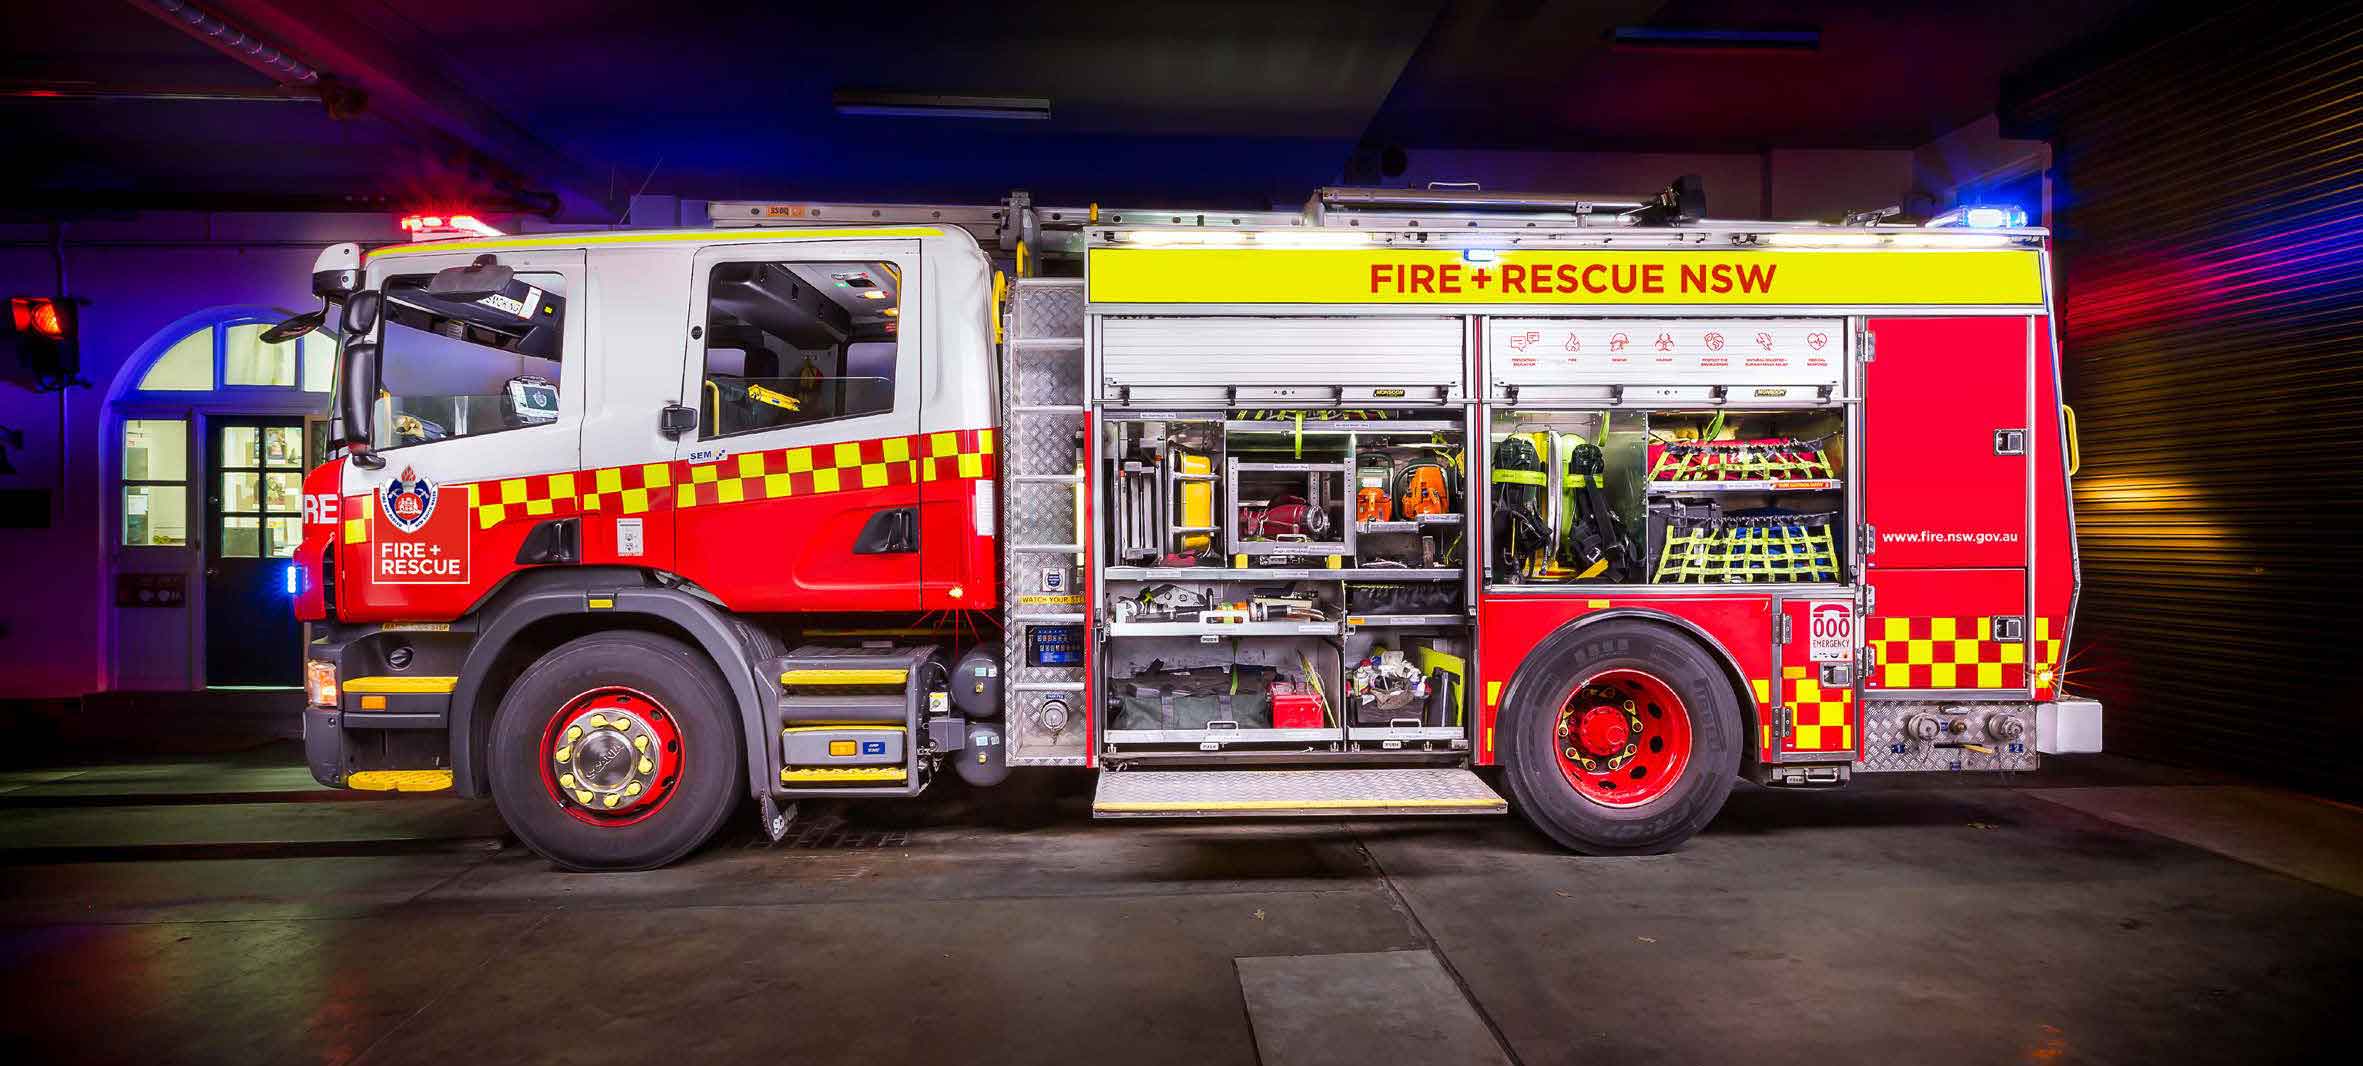 Fire and Rescue NSW truck